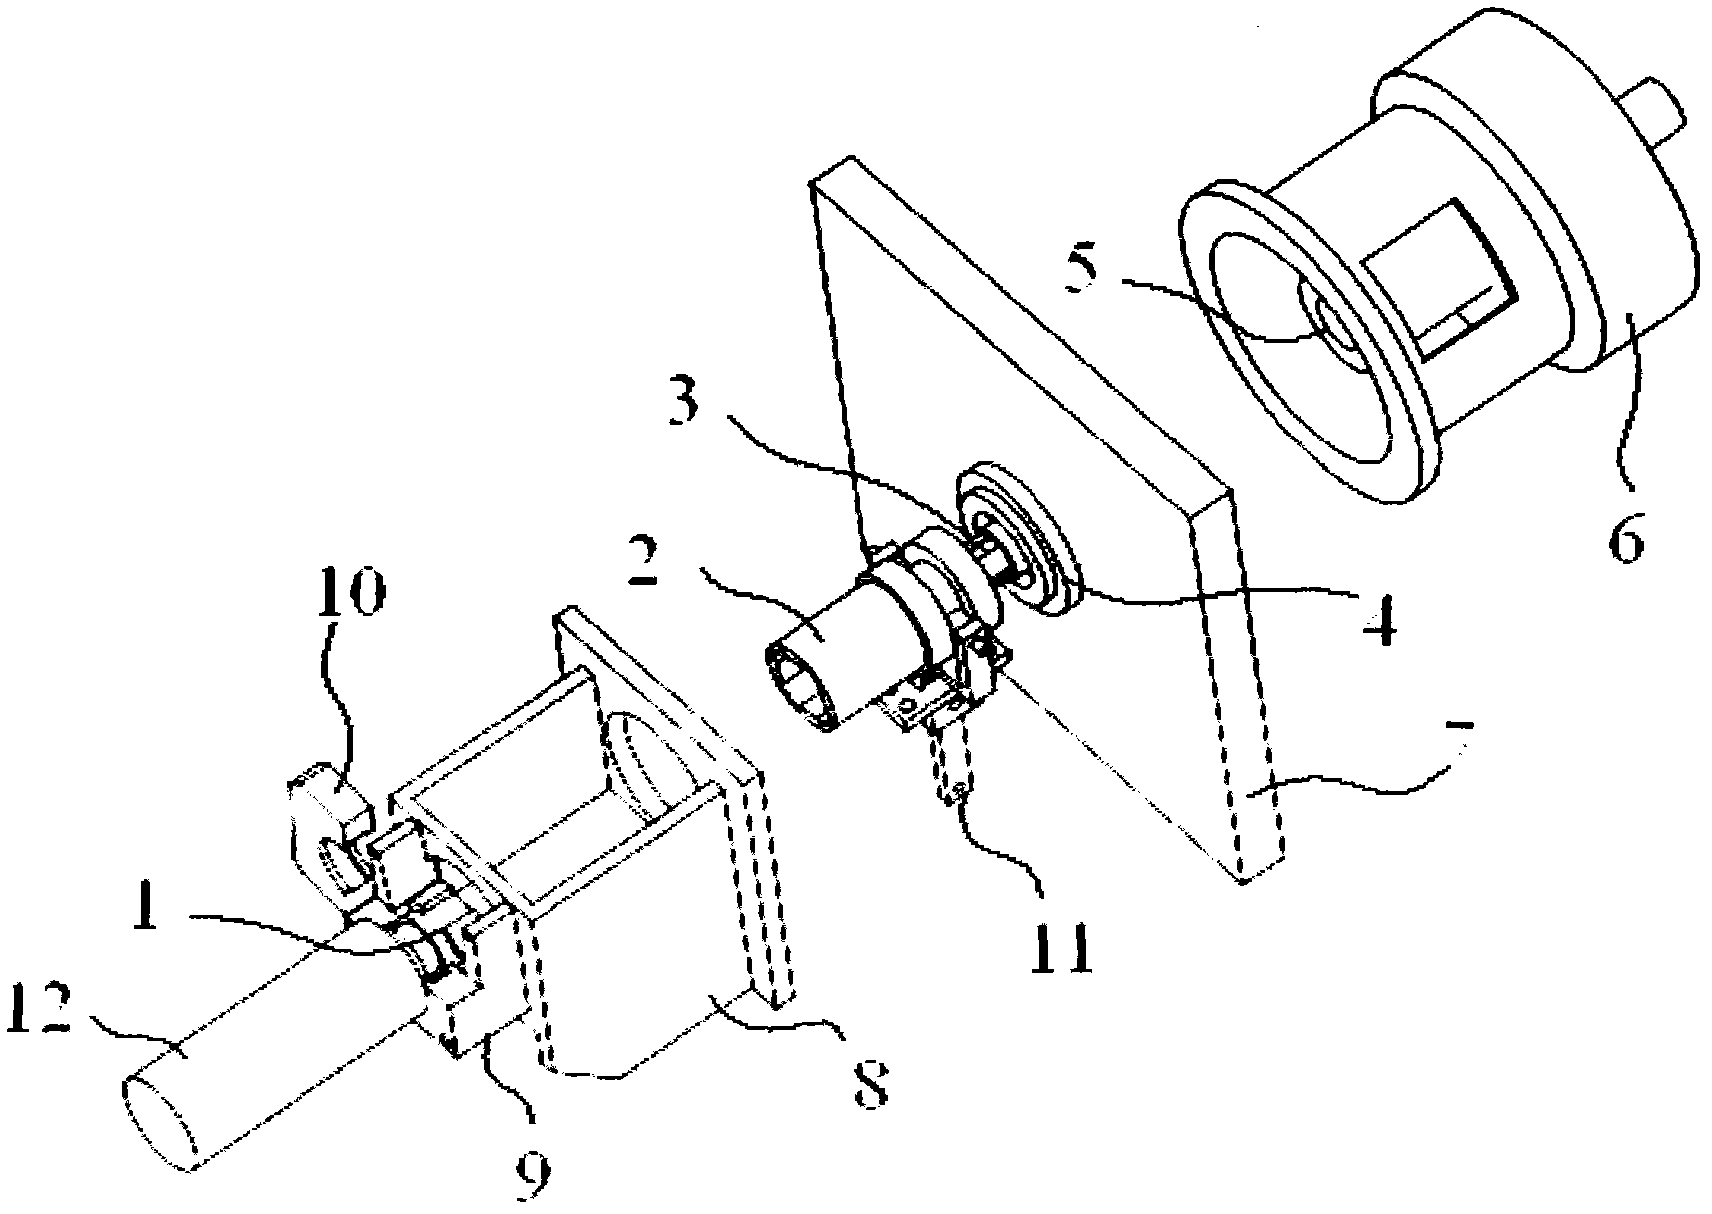 Air expansion shaft driving device